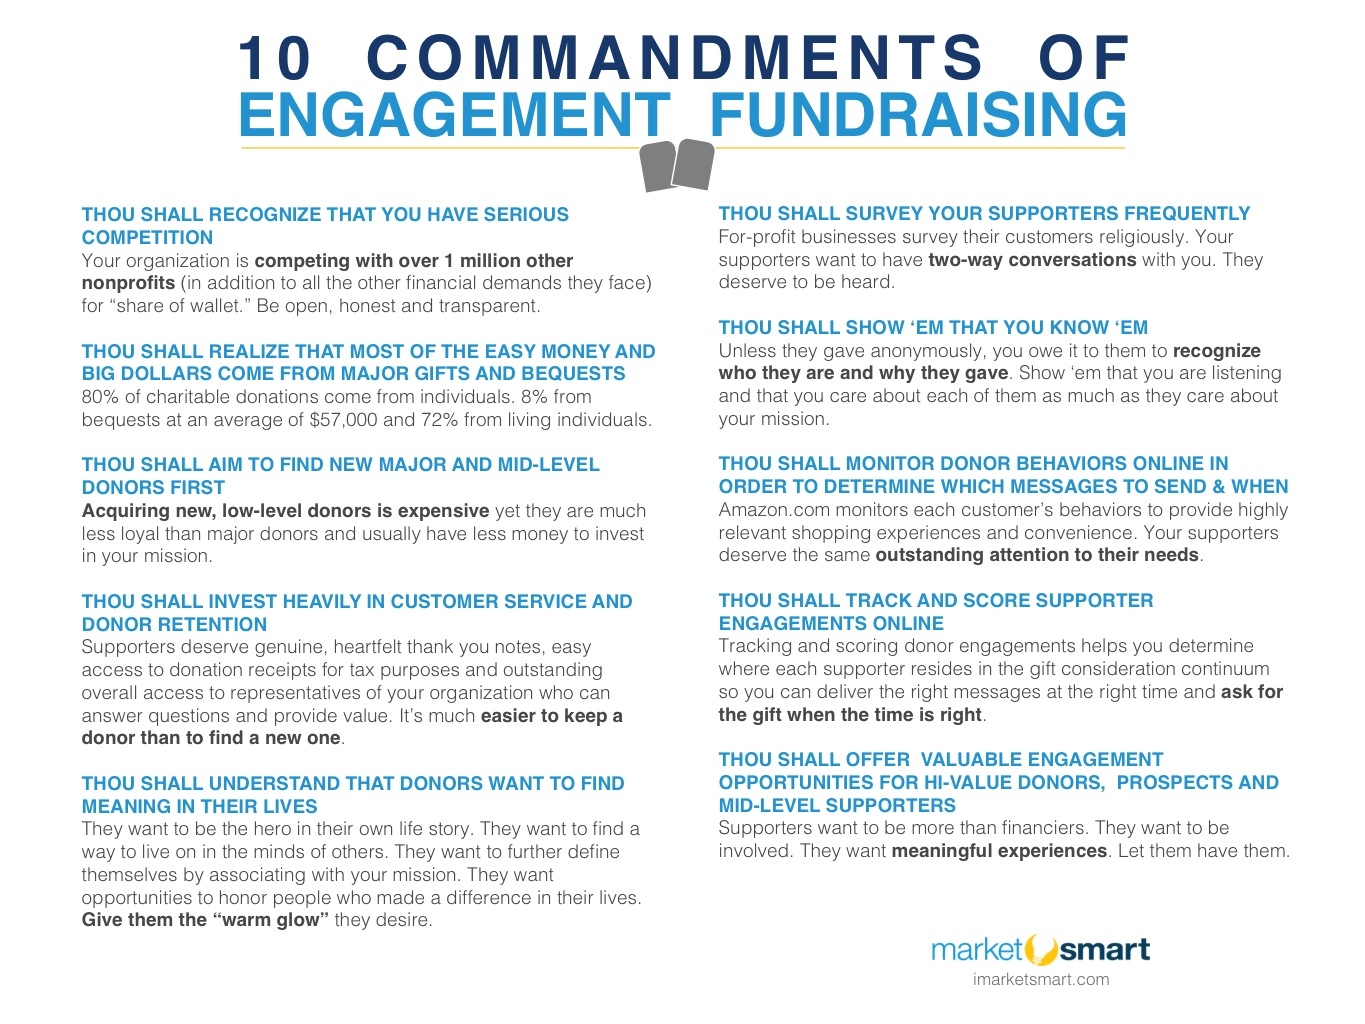 The 10 Commandments of Engagement Fundraising